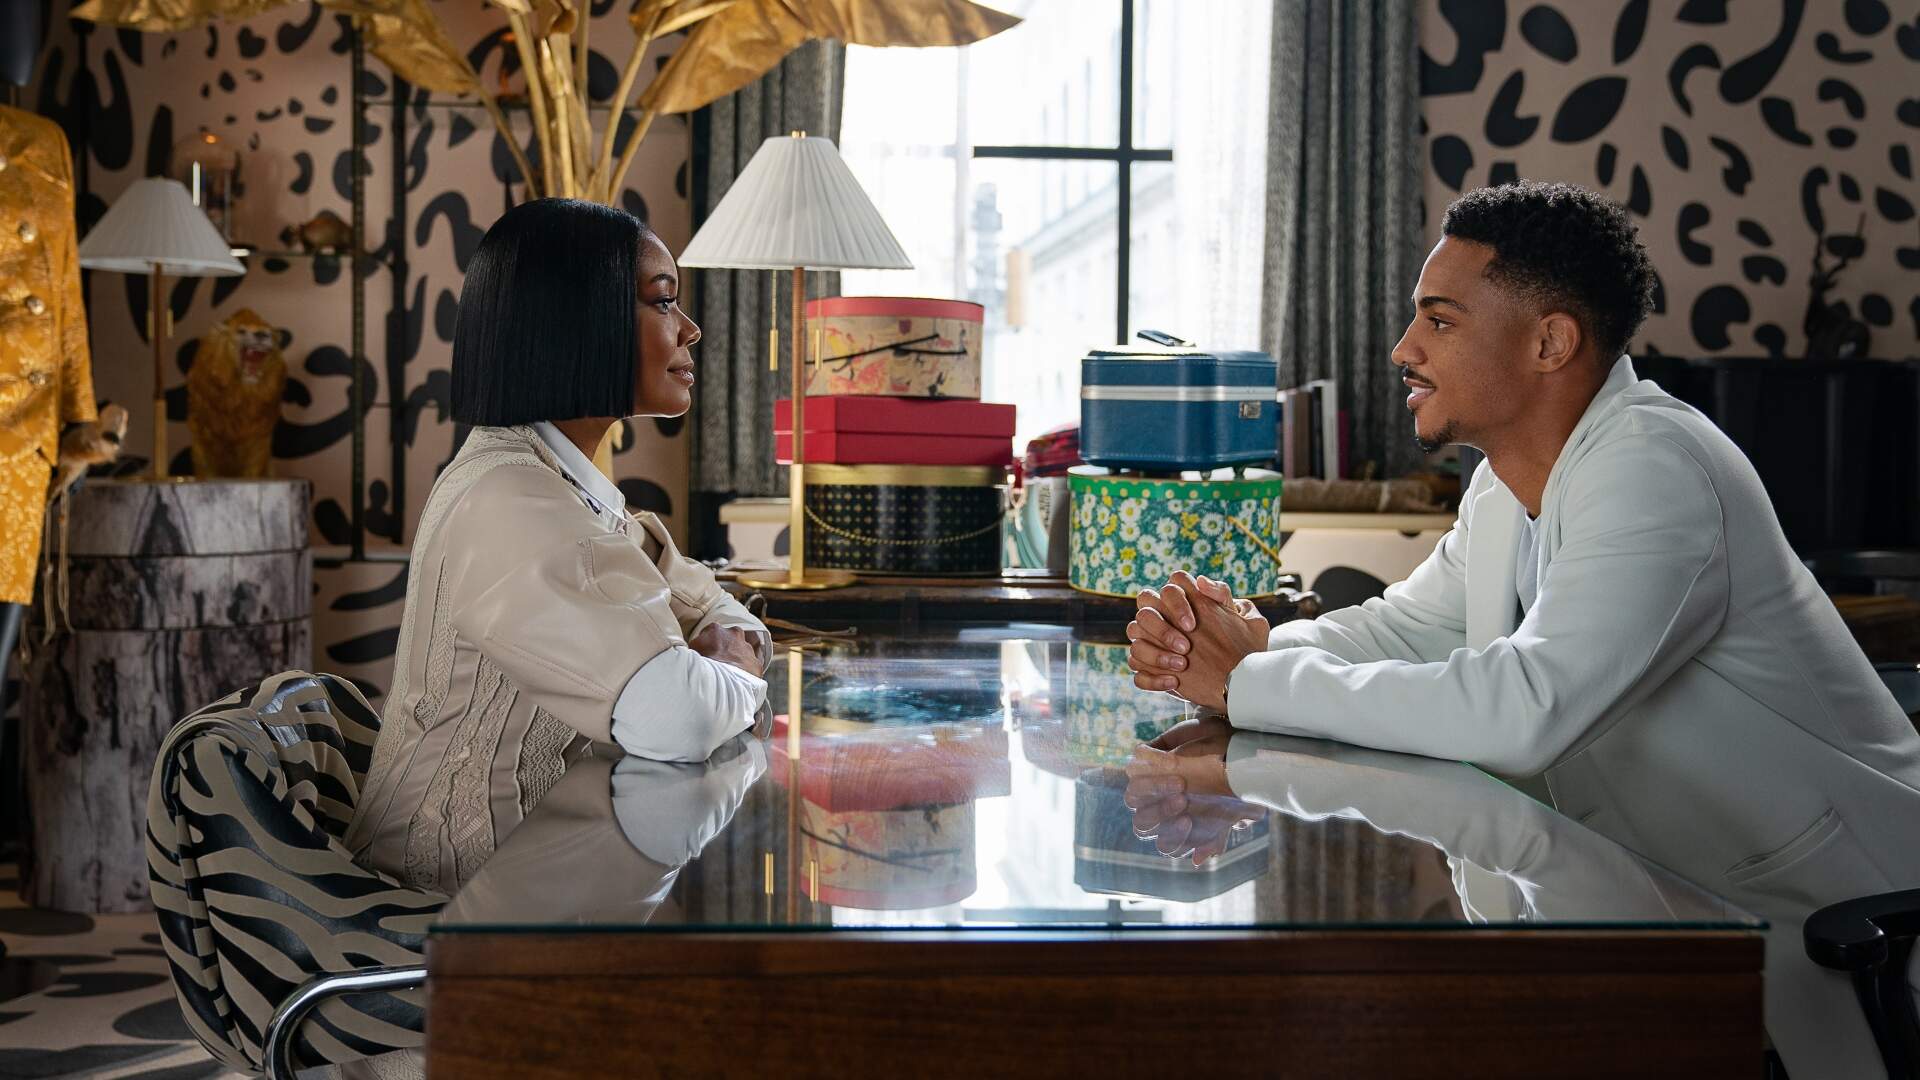 The Perfect Find. (L to R) Gabrielle Union as Jenna and Keith Powers as Eric in The Perfect Find. Cr. Alyssa Longchamp/Netflix © 2023